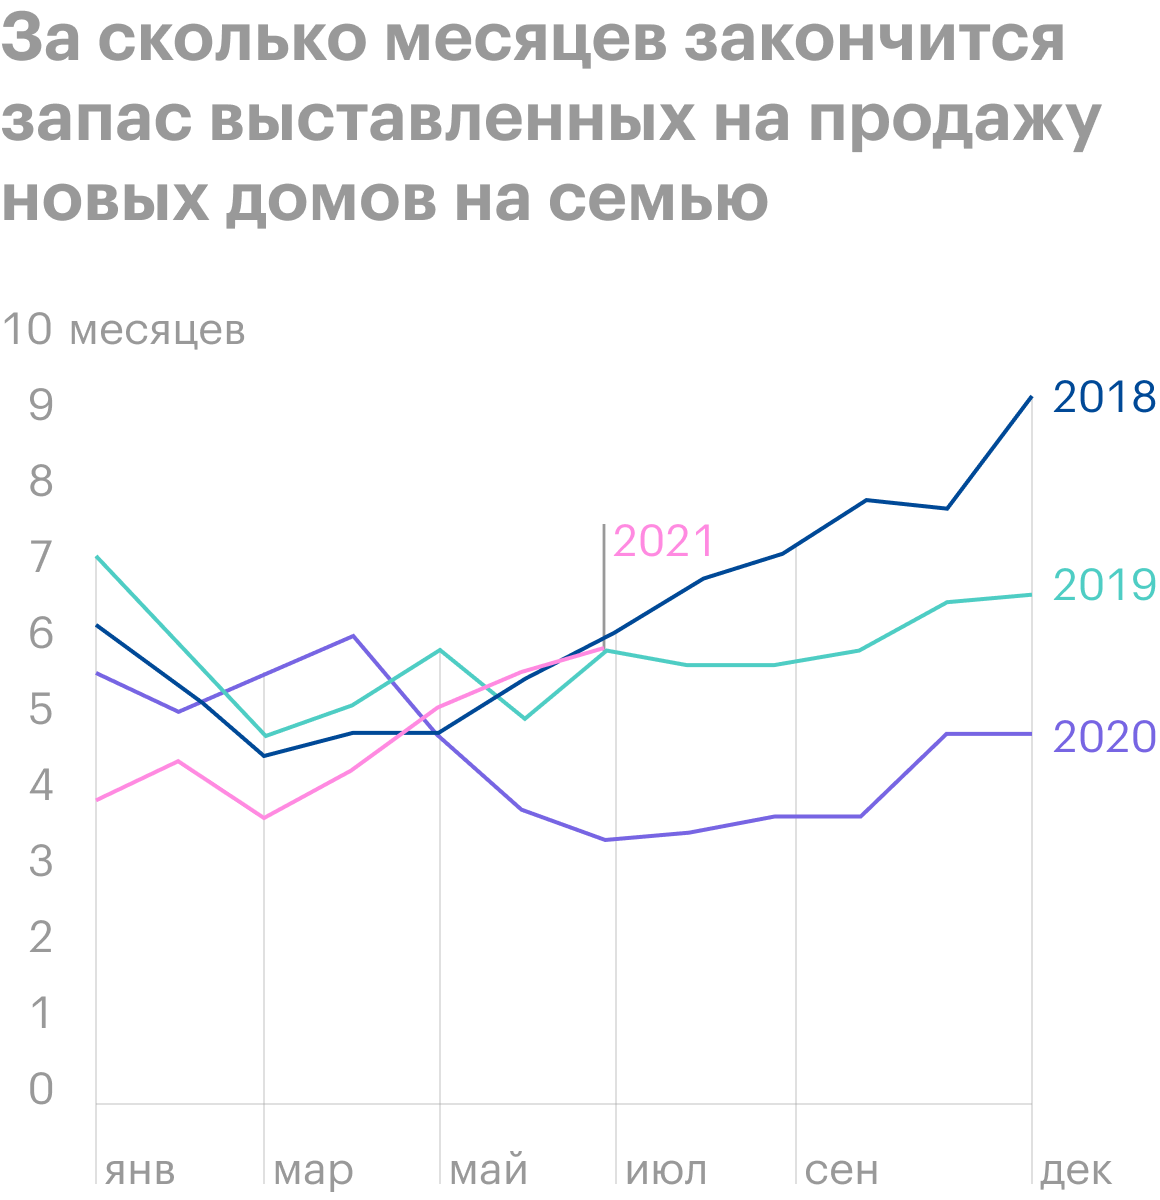 Источник: Daily Shot, Inventories of new homes have been rising